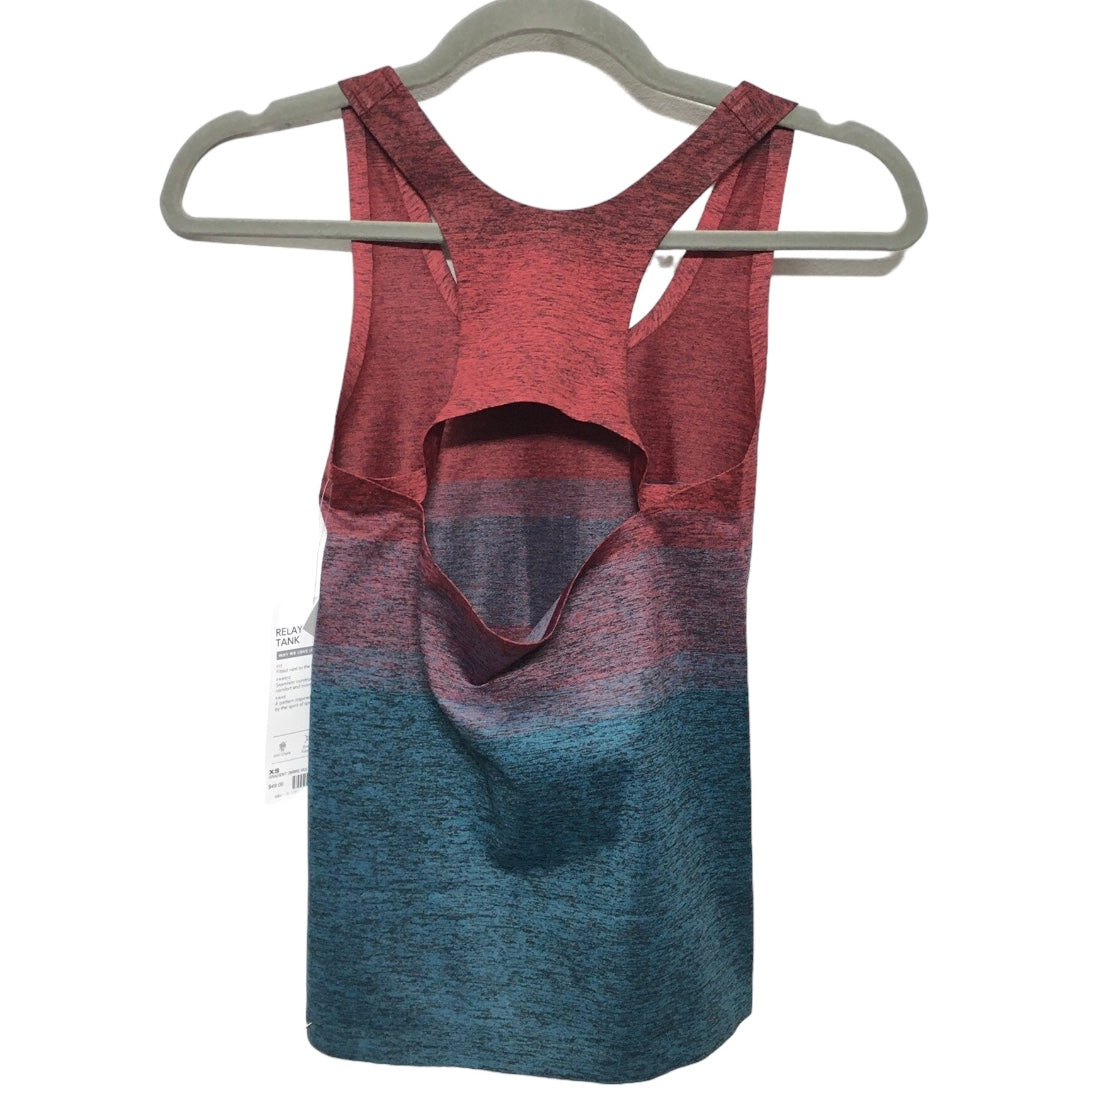 Blue & Red Athletic Tank Top Athleta, Size Xs